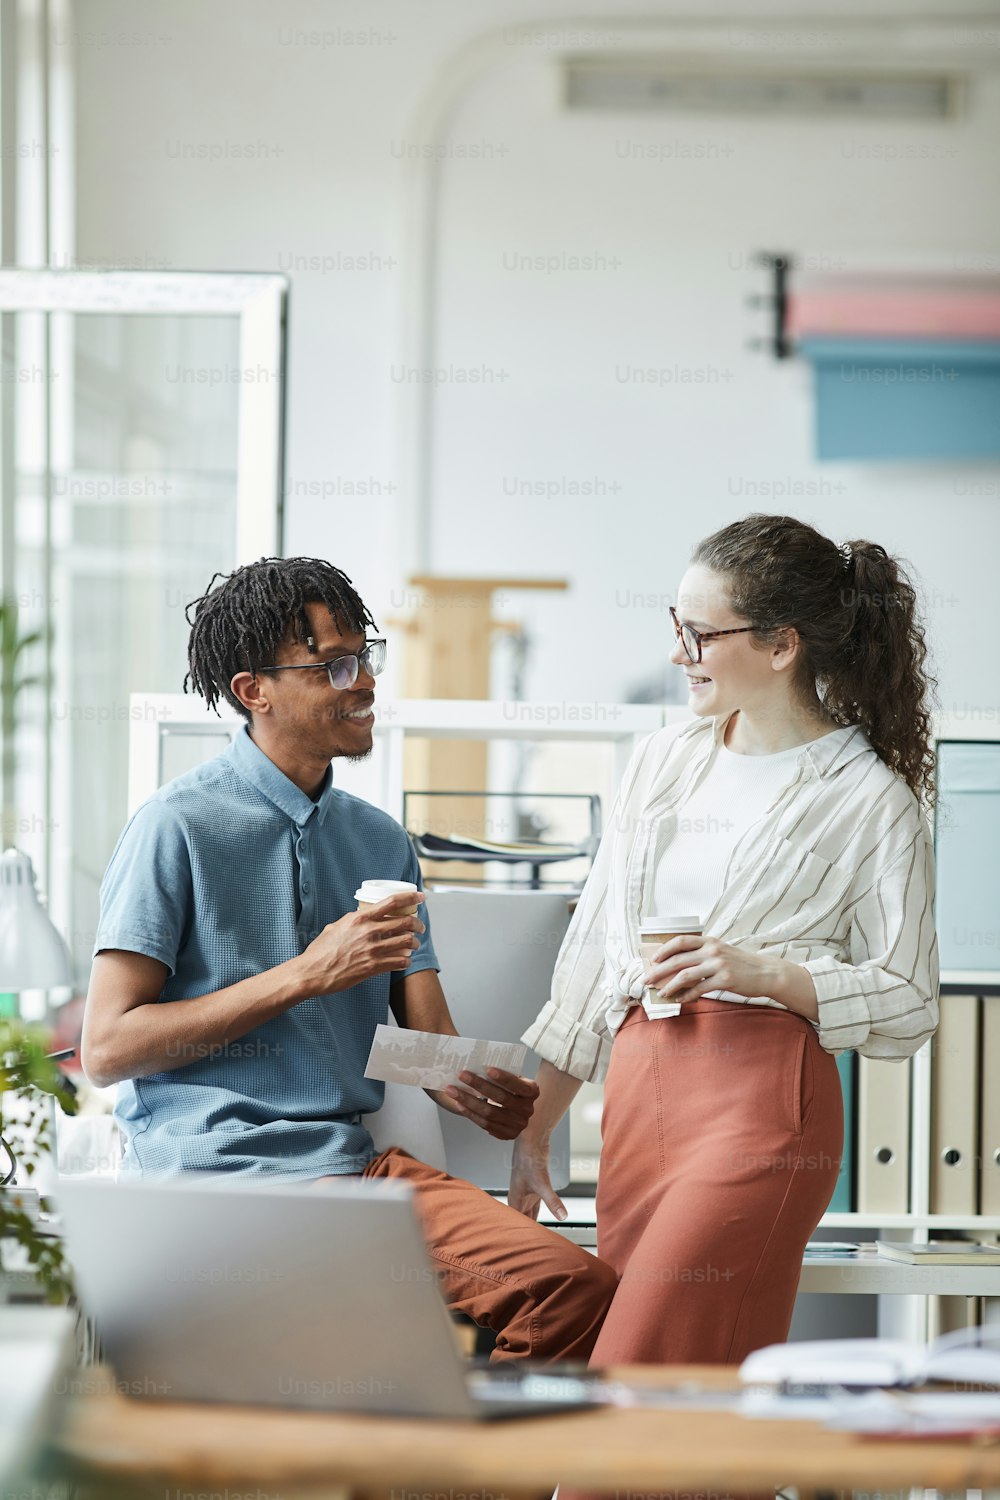 Vertical portrait of two creative young people looking at printed photographs and chatting during coffee break in modern office